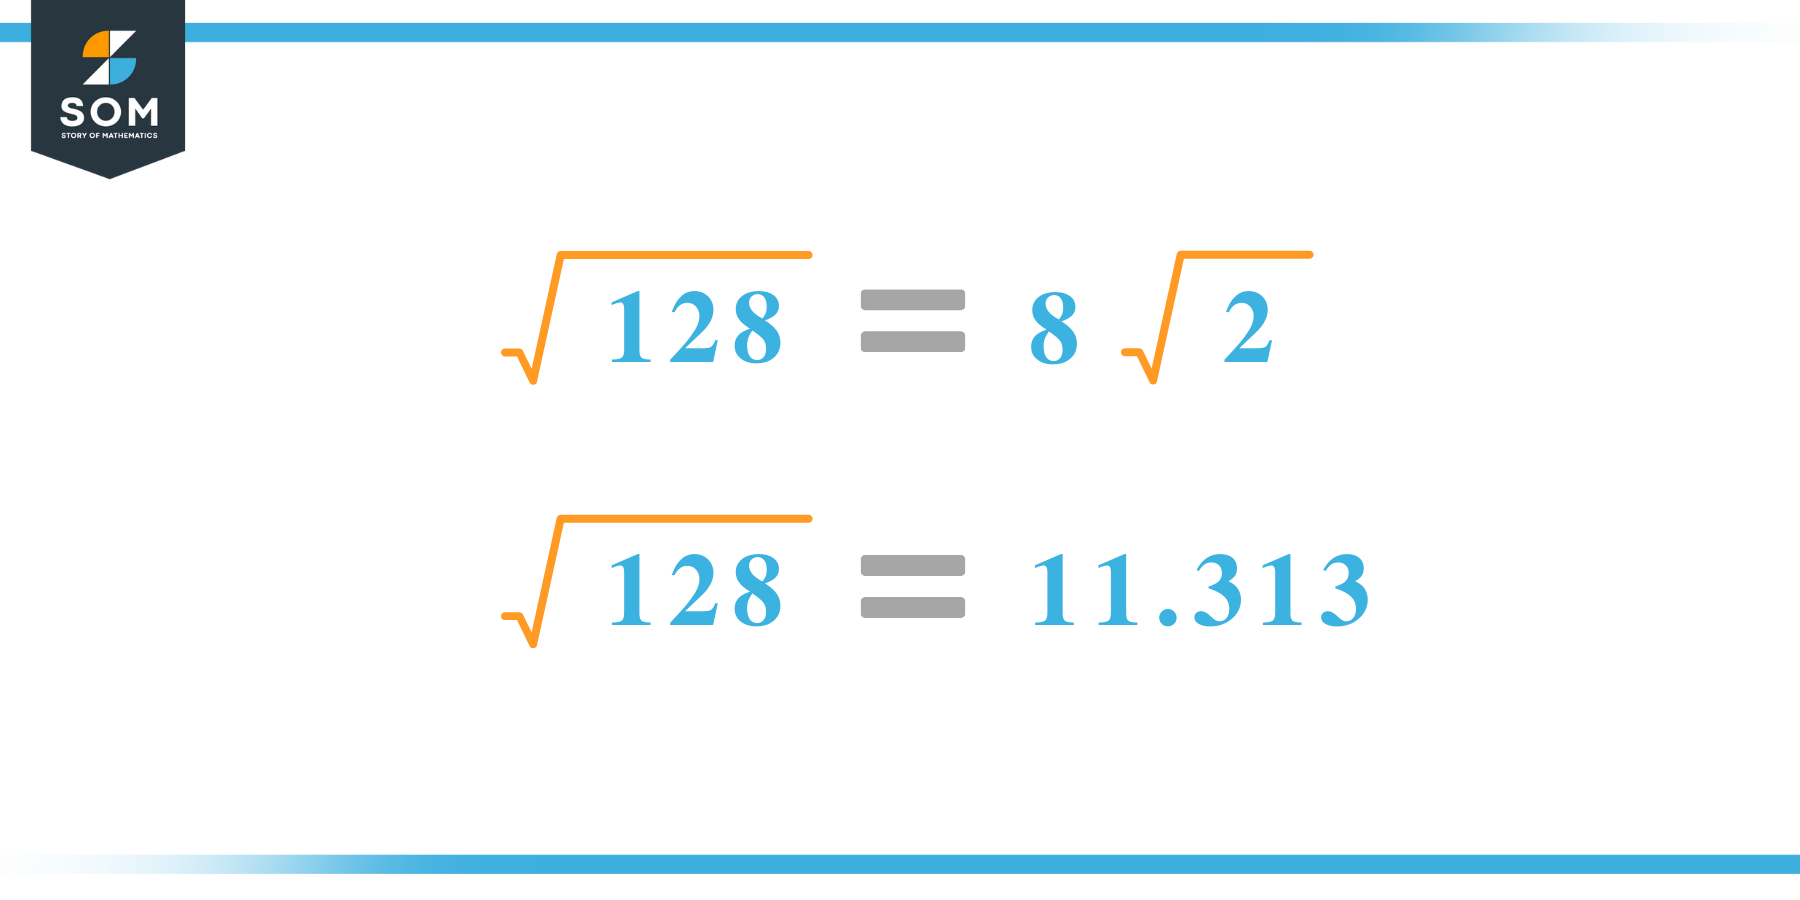 Square root of 128 Calculation